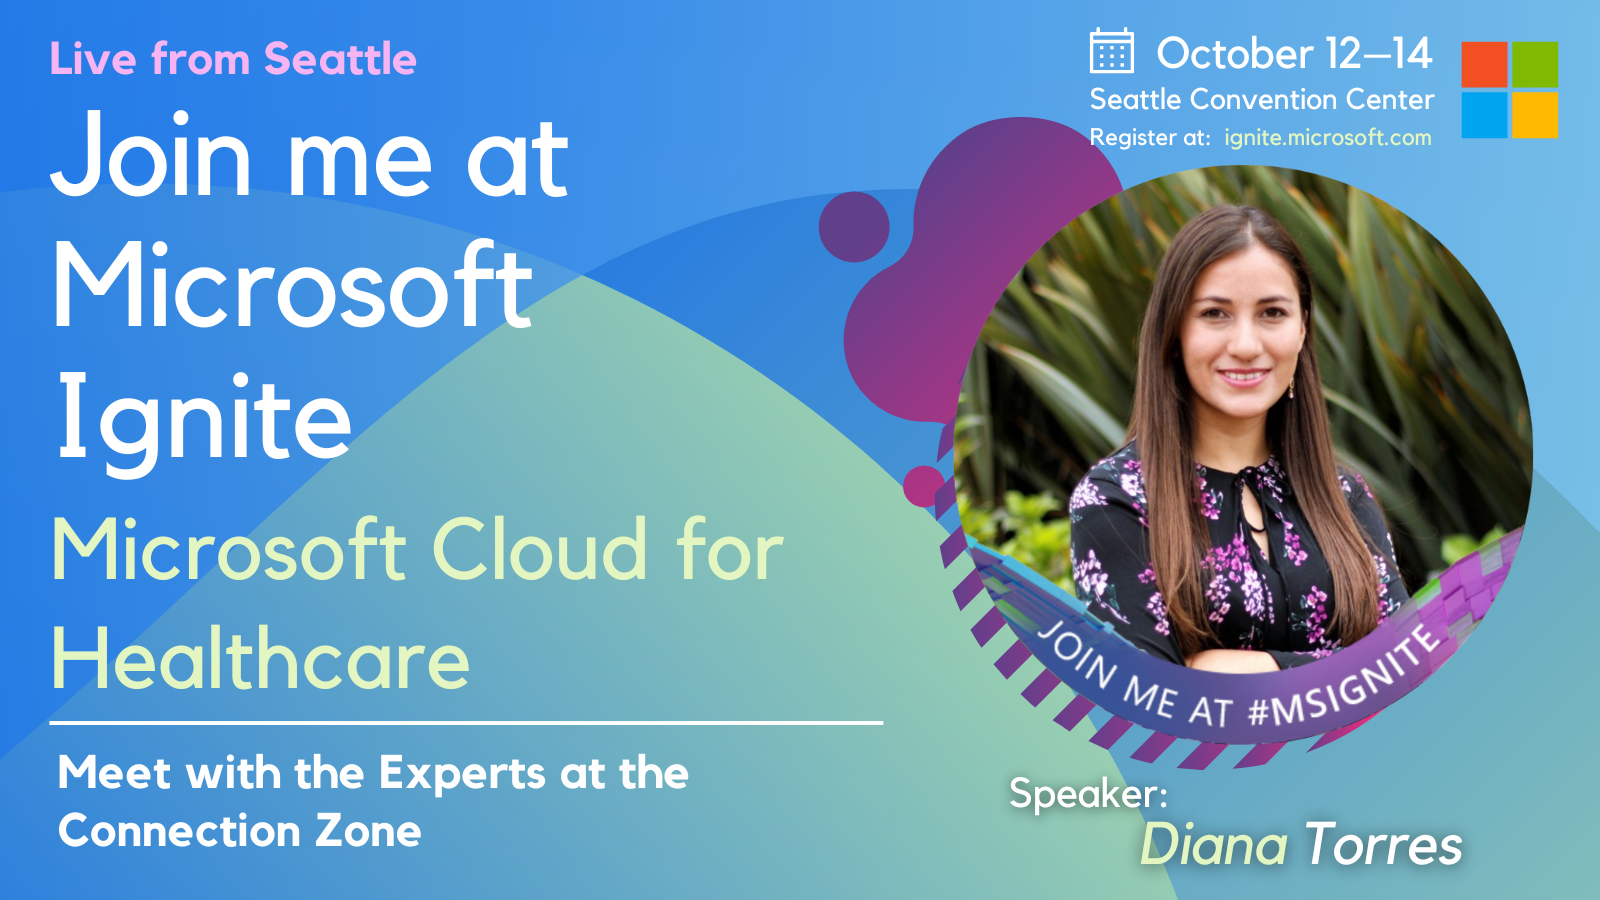 Big Announce: Excited To Join The Microsoft Cloud For Healthcare Experts #MicrosoftIgnite